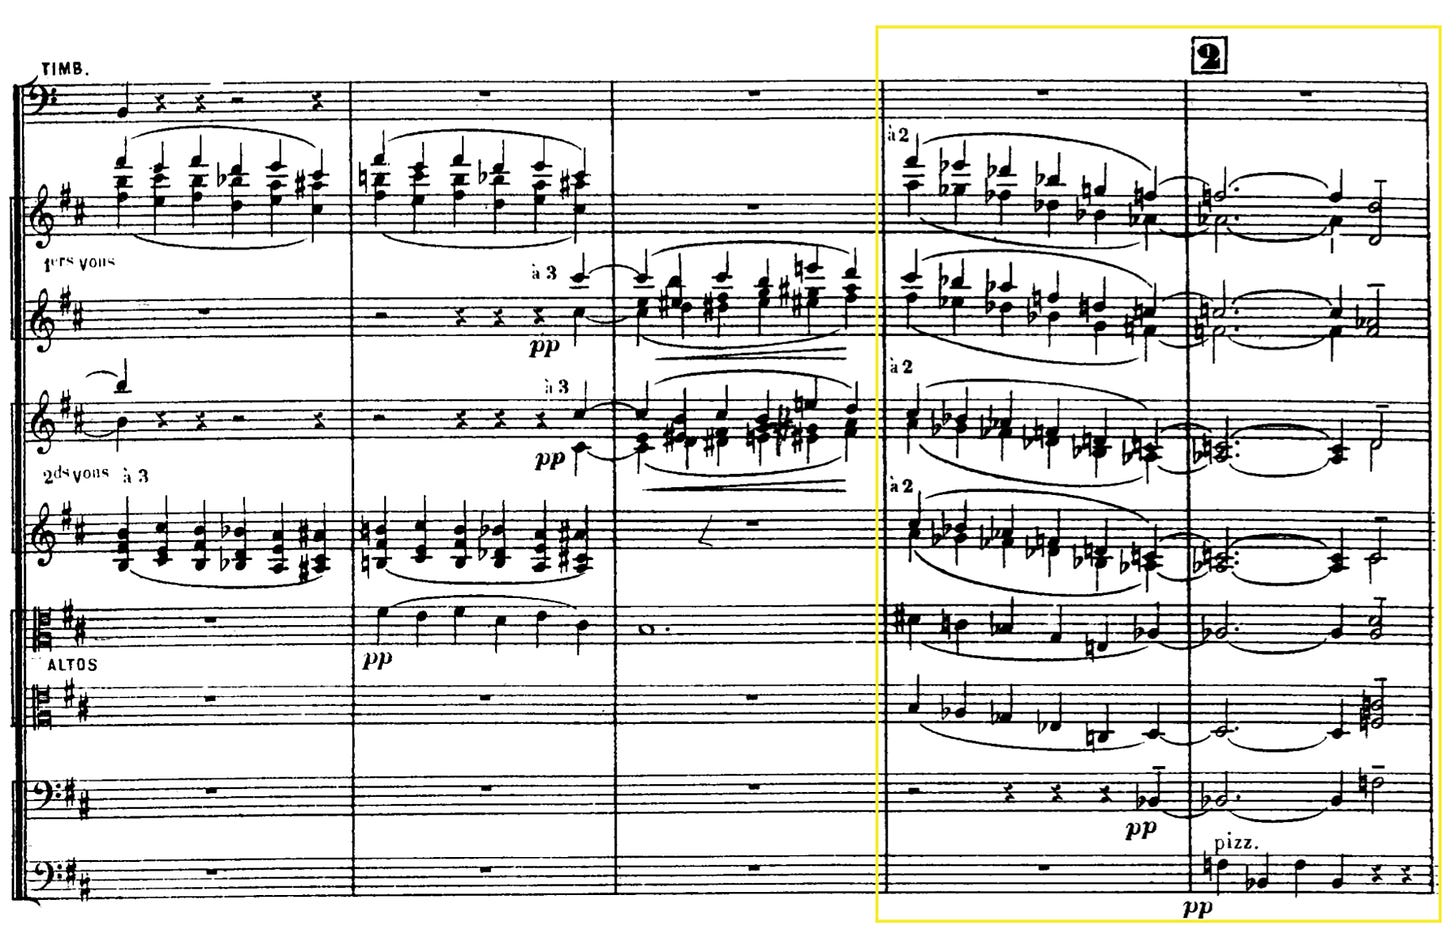 Figure 9. Debussy's Nuages. You can see in the first violins (the second and third staff from the top) the rich series of fifths that help create his unique sound world.https://www.youtube.com/watch?v=s9rp2owmY7E